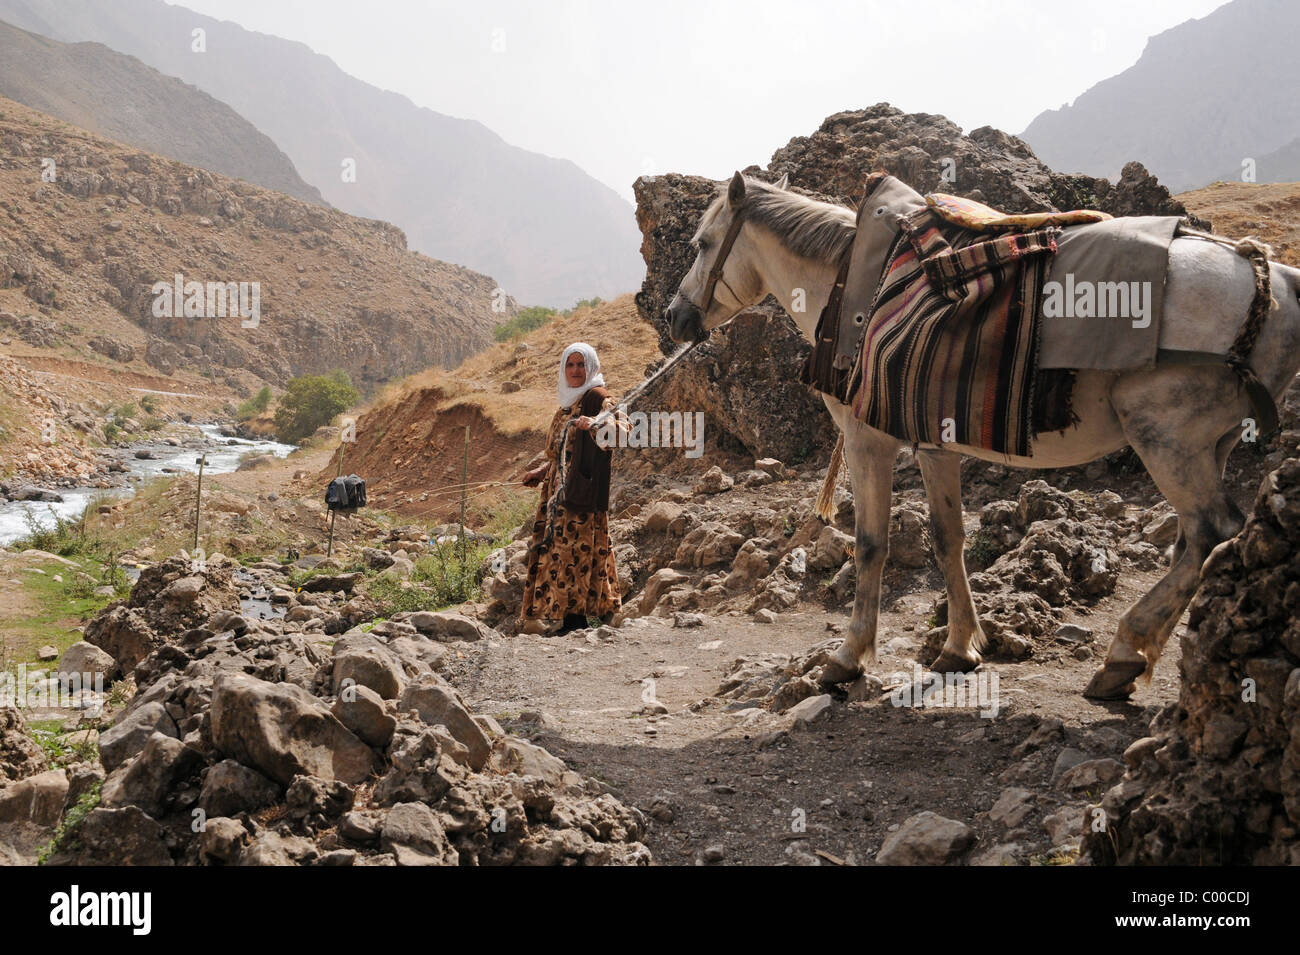 A nomadic Kurdish shepherd woman leading her horse out from a cave near the village of Bahcesaray, in the Zagros Mountains of southeastern Turkey. Stock Photo